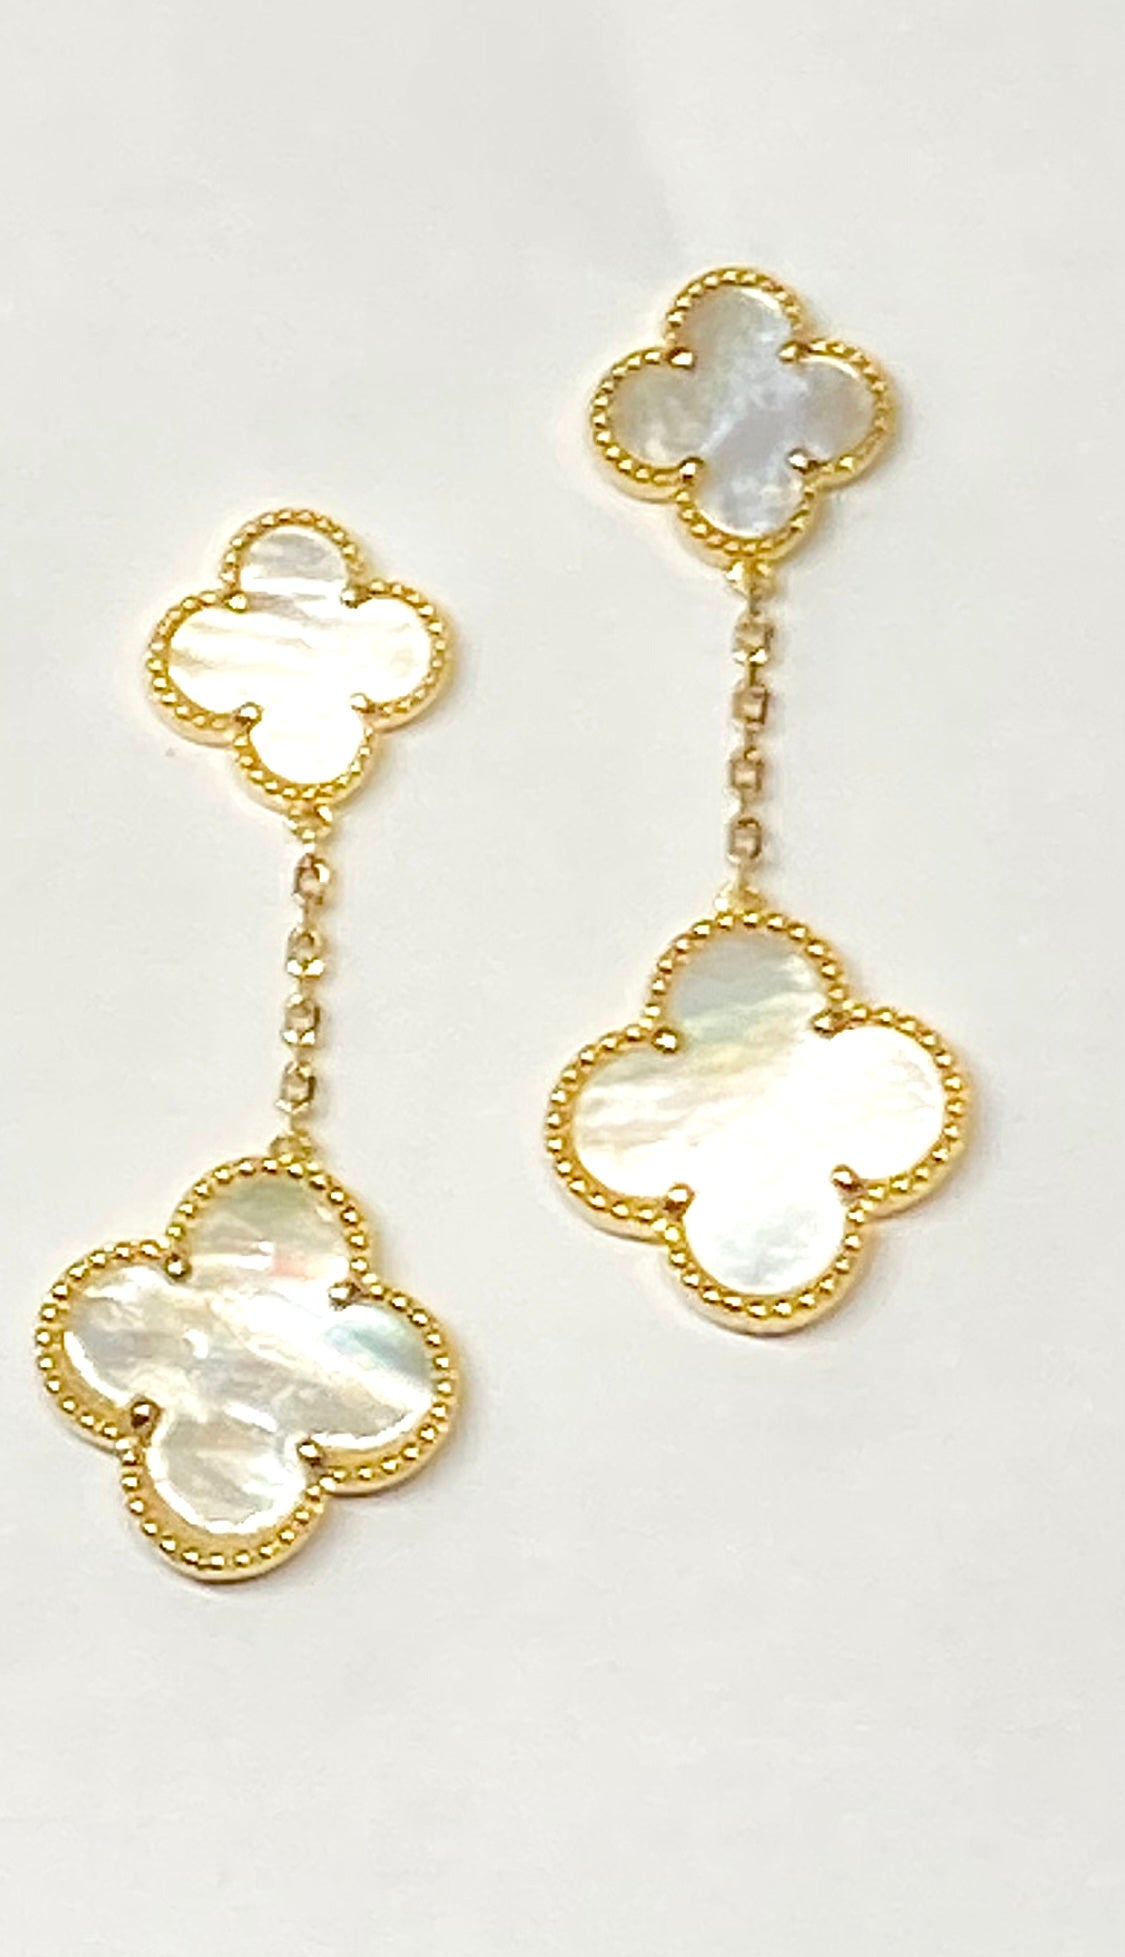 MOTHER OF PEARL CLOVER EARRINGS 001-678-00157 | Parkers' Karat Patch |  Asheville, NC